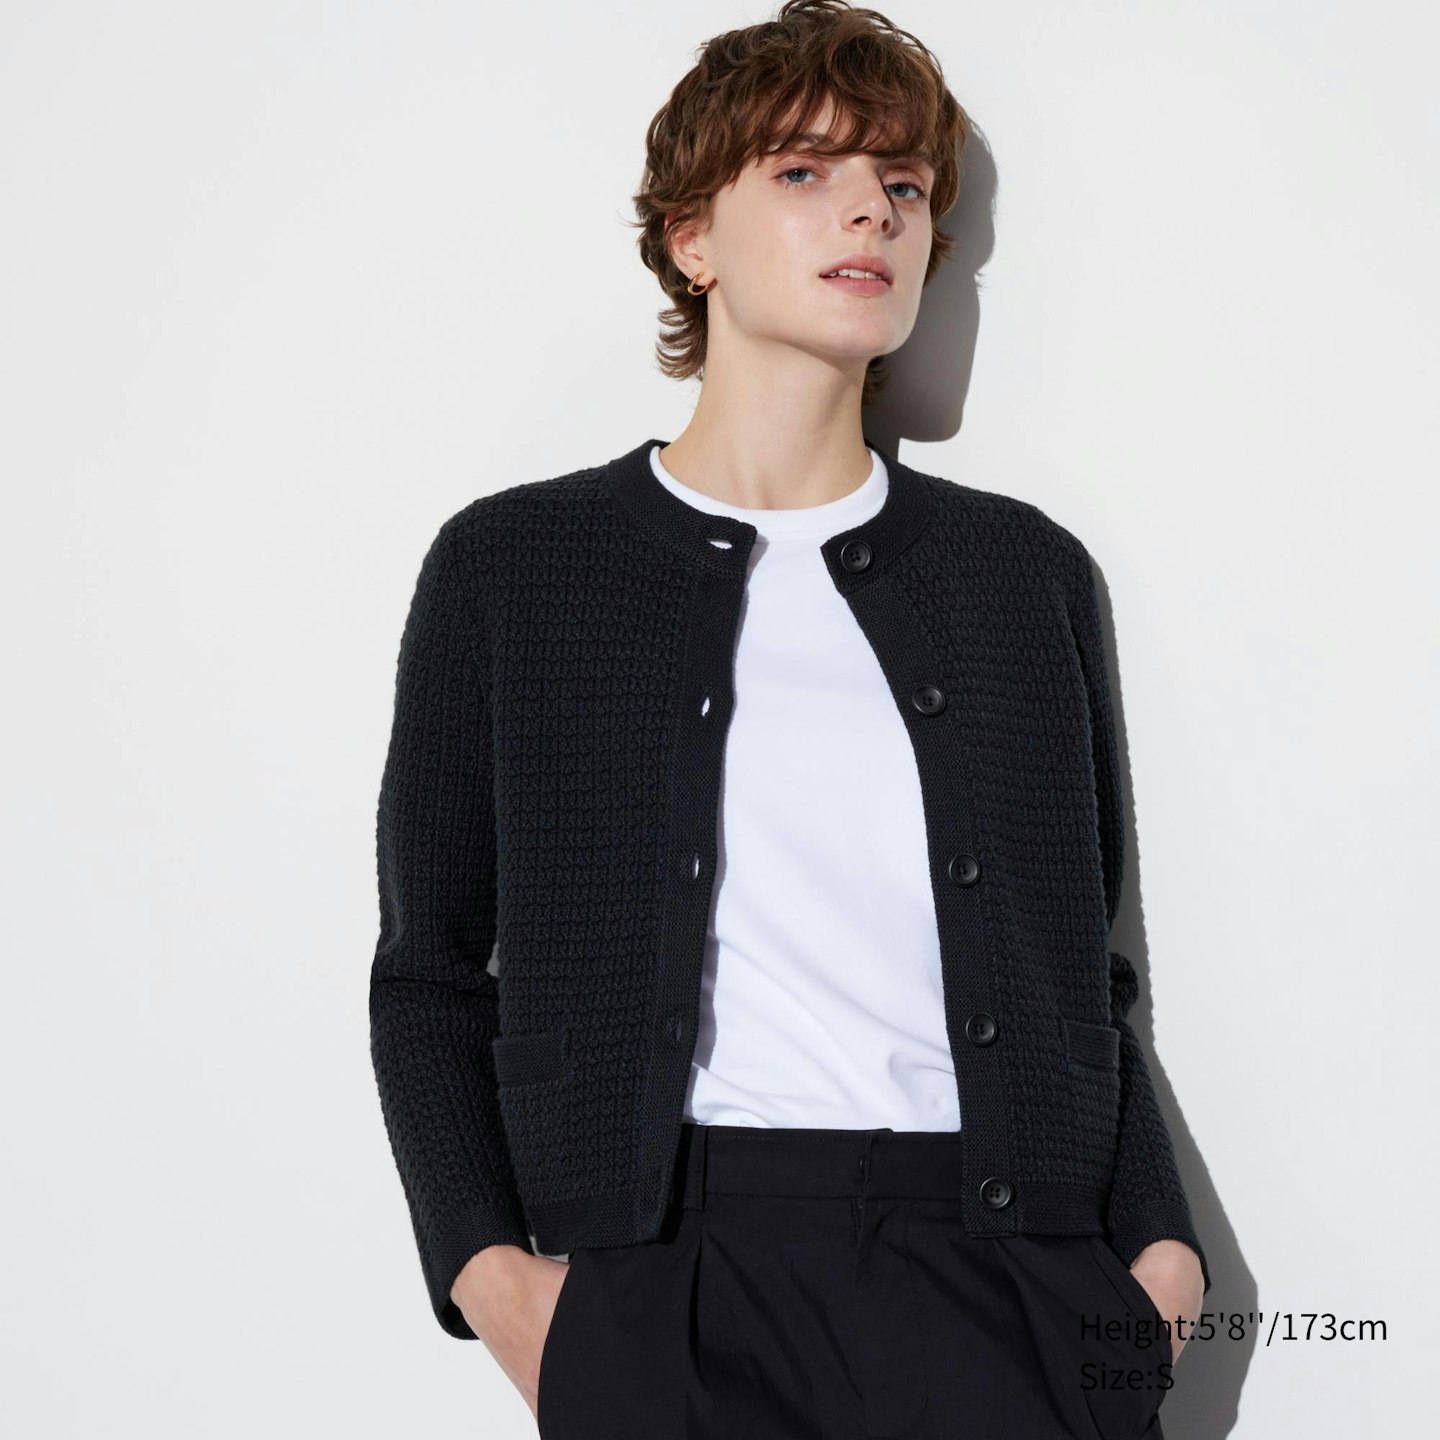 This Viral Uniqlo Knitted Jacket Is The Dream Winter Staple